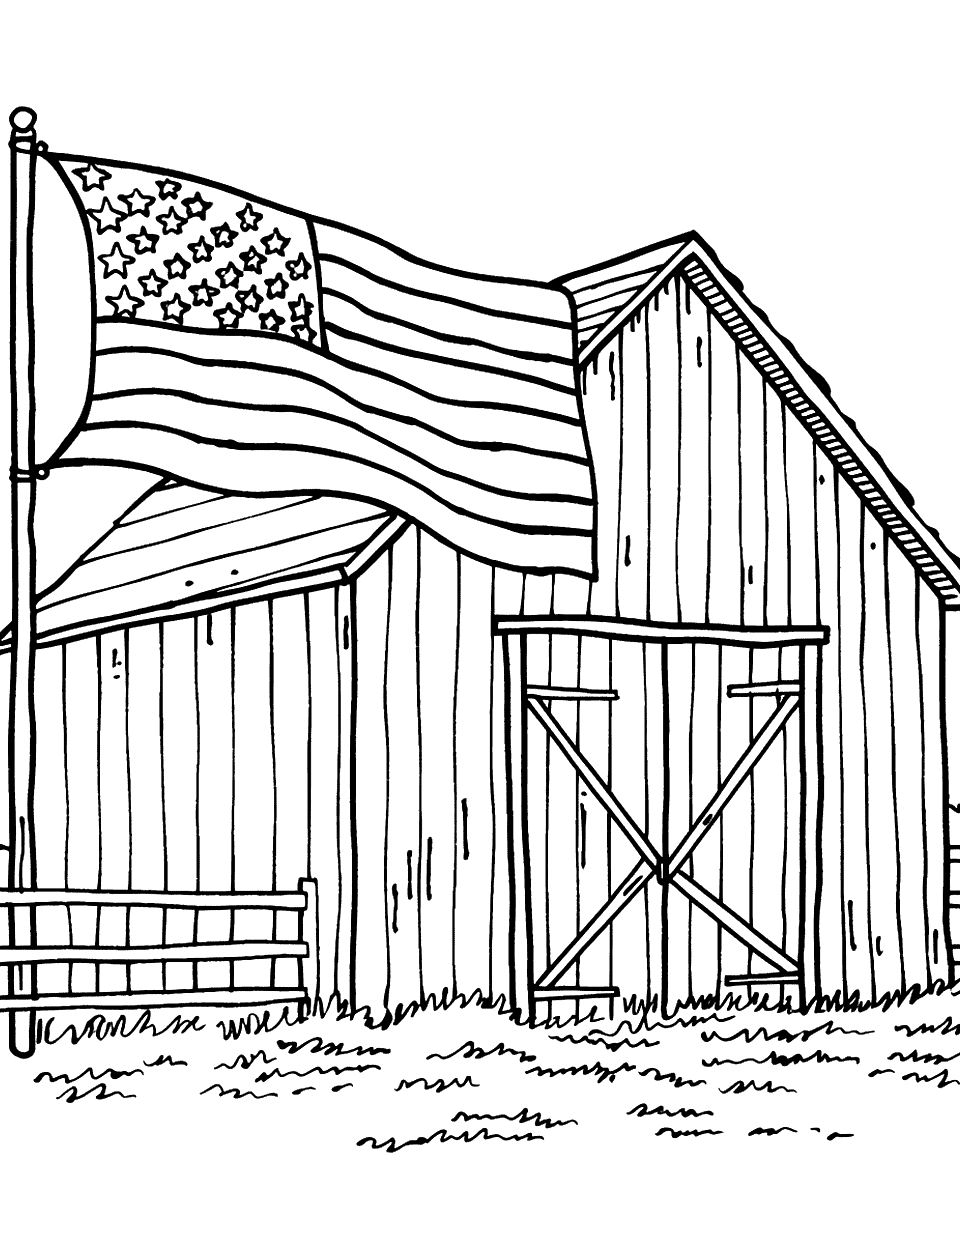 American Flag on a Farm Coloring Page - A rustic barn with an American flag rasied on the front side.